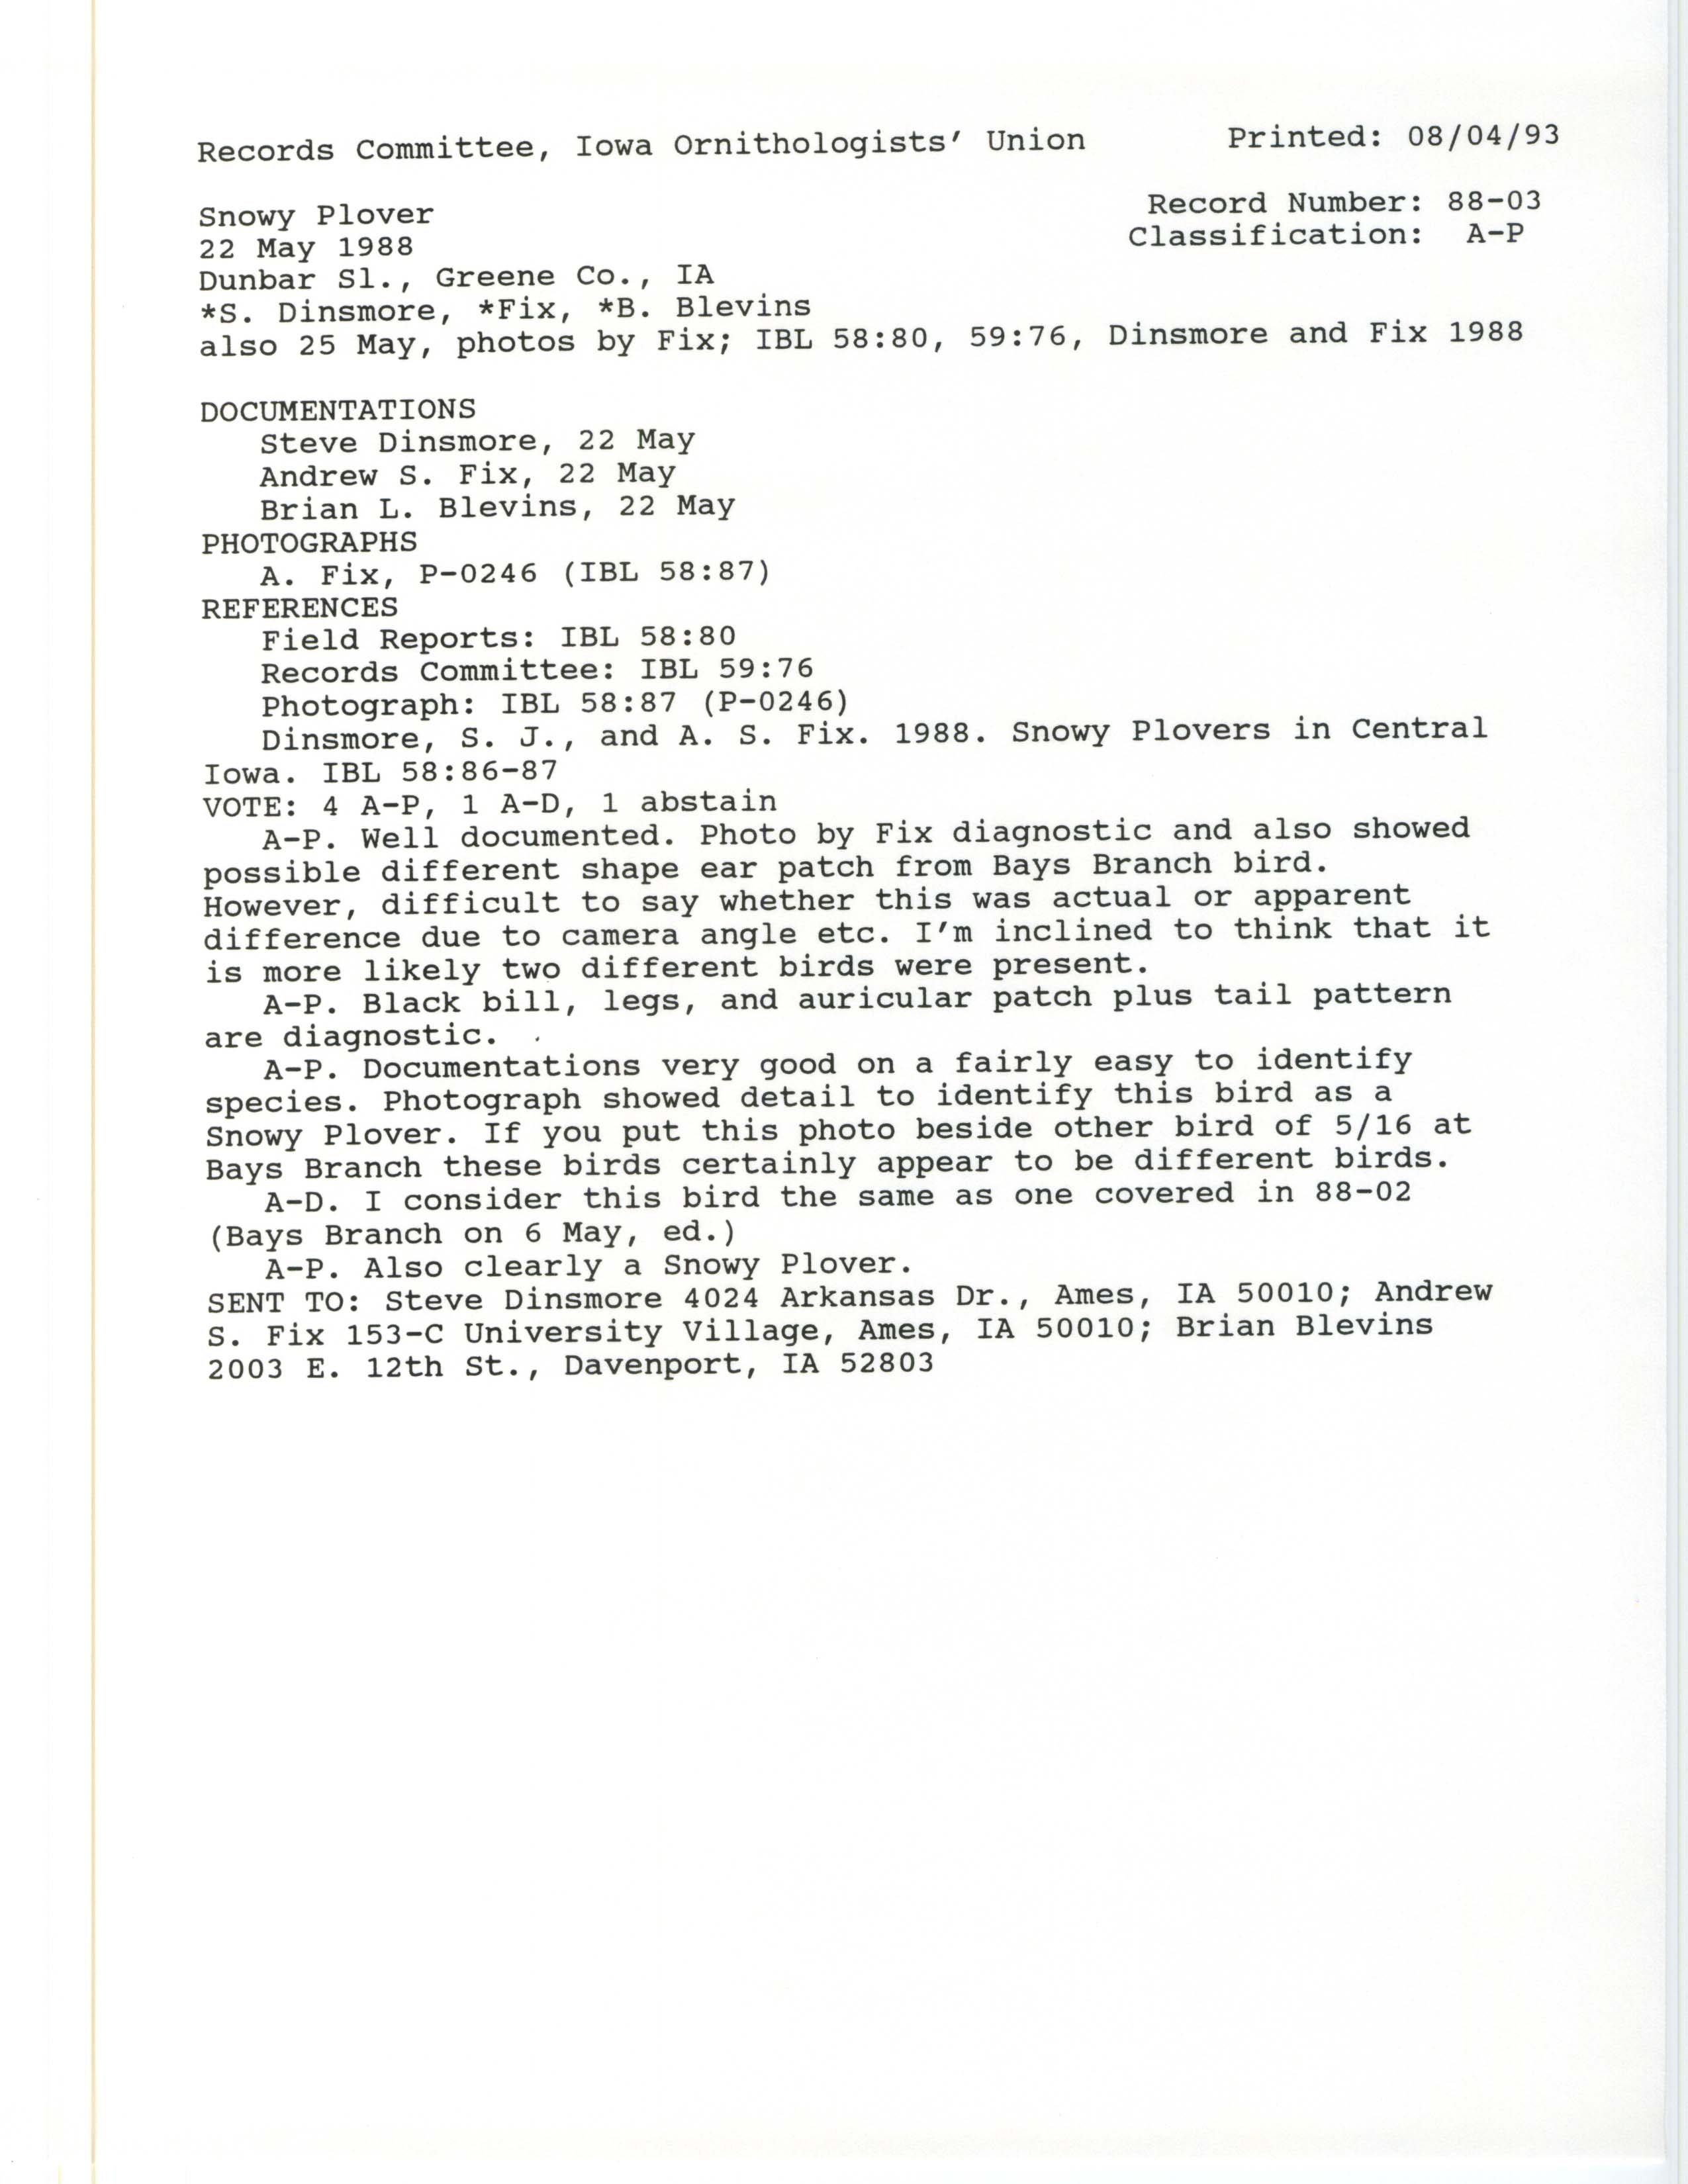 Records Committee review for rare bird sighting of Snowy Plover at Dunbar Slough, 1988